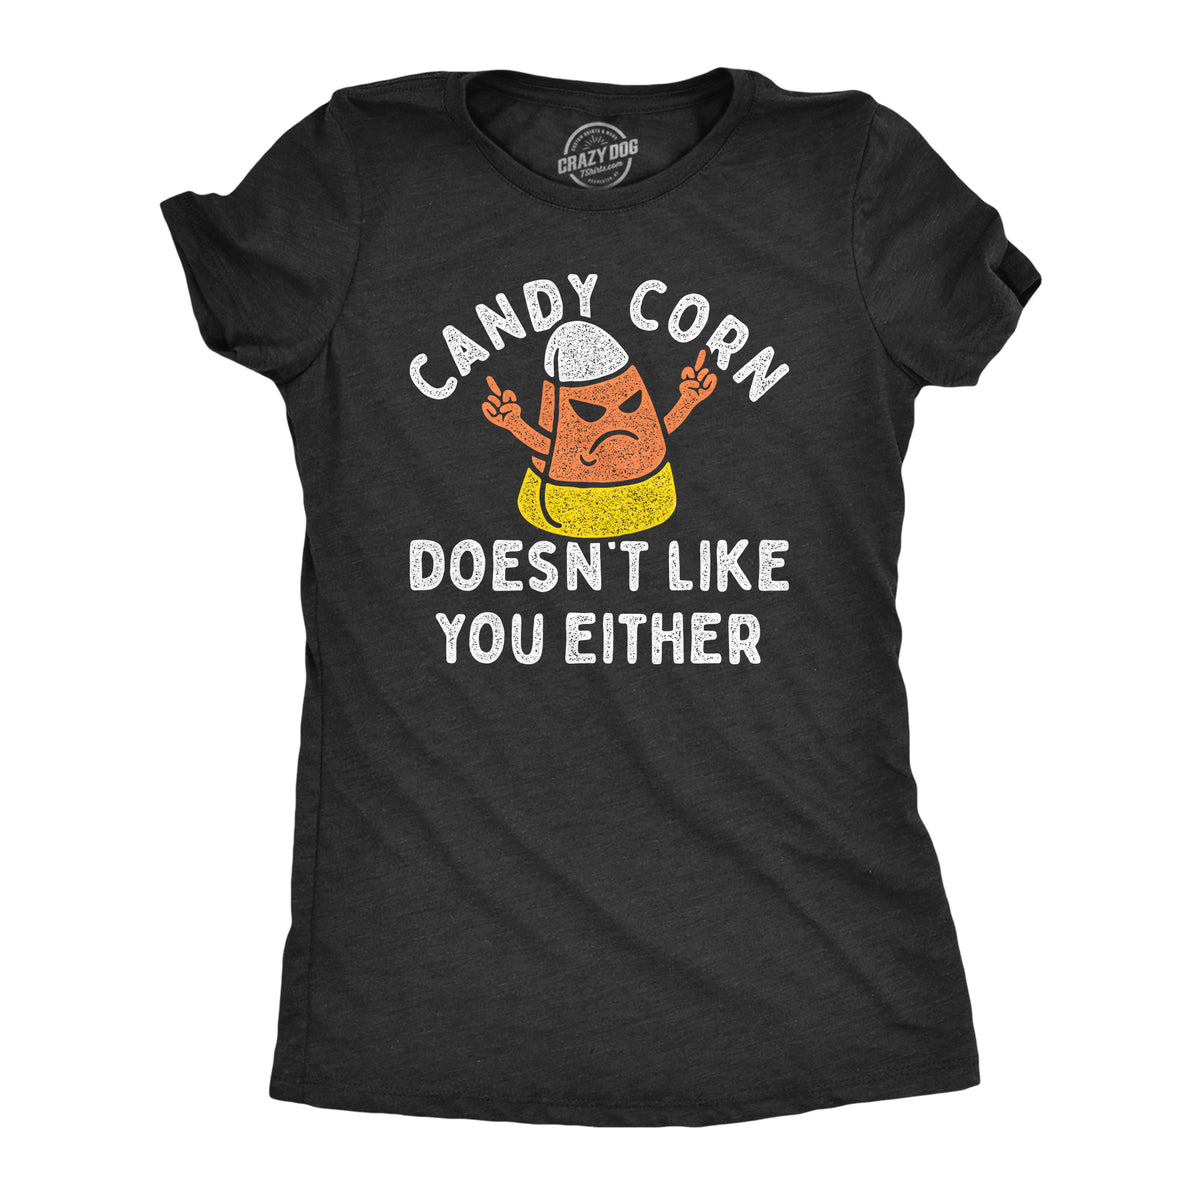 Funny Heather Black - CANDYCORN Candy Corn Doesnt Like You Either Womens T Shirt Nerdy Halloween Food Tee